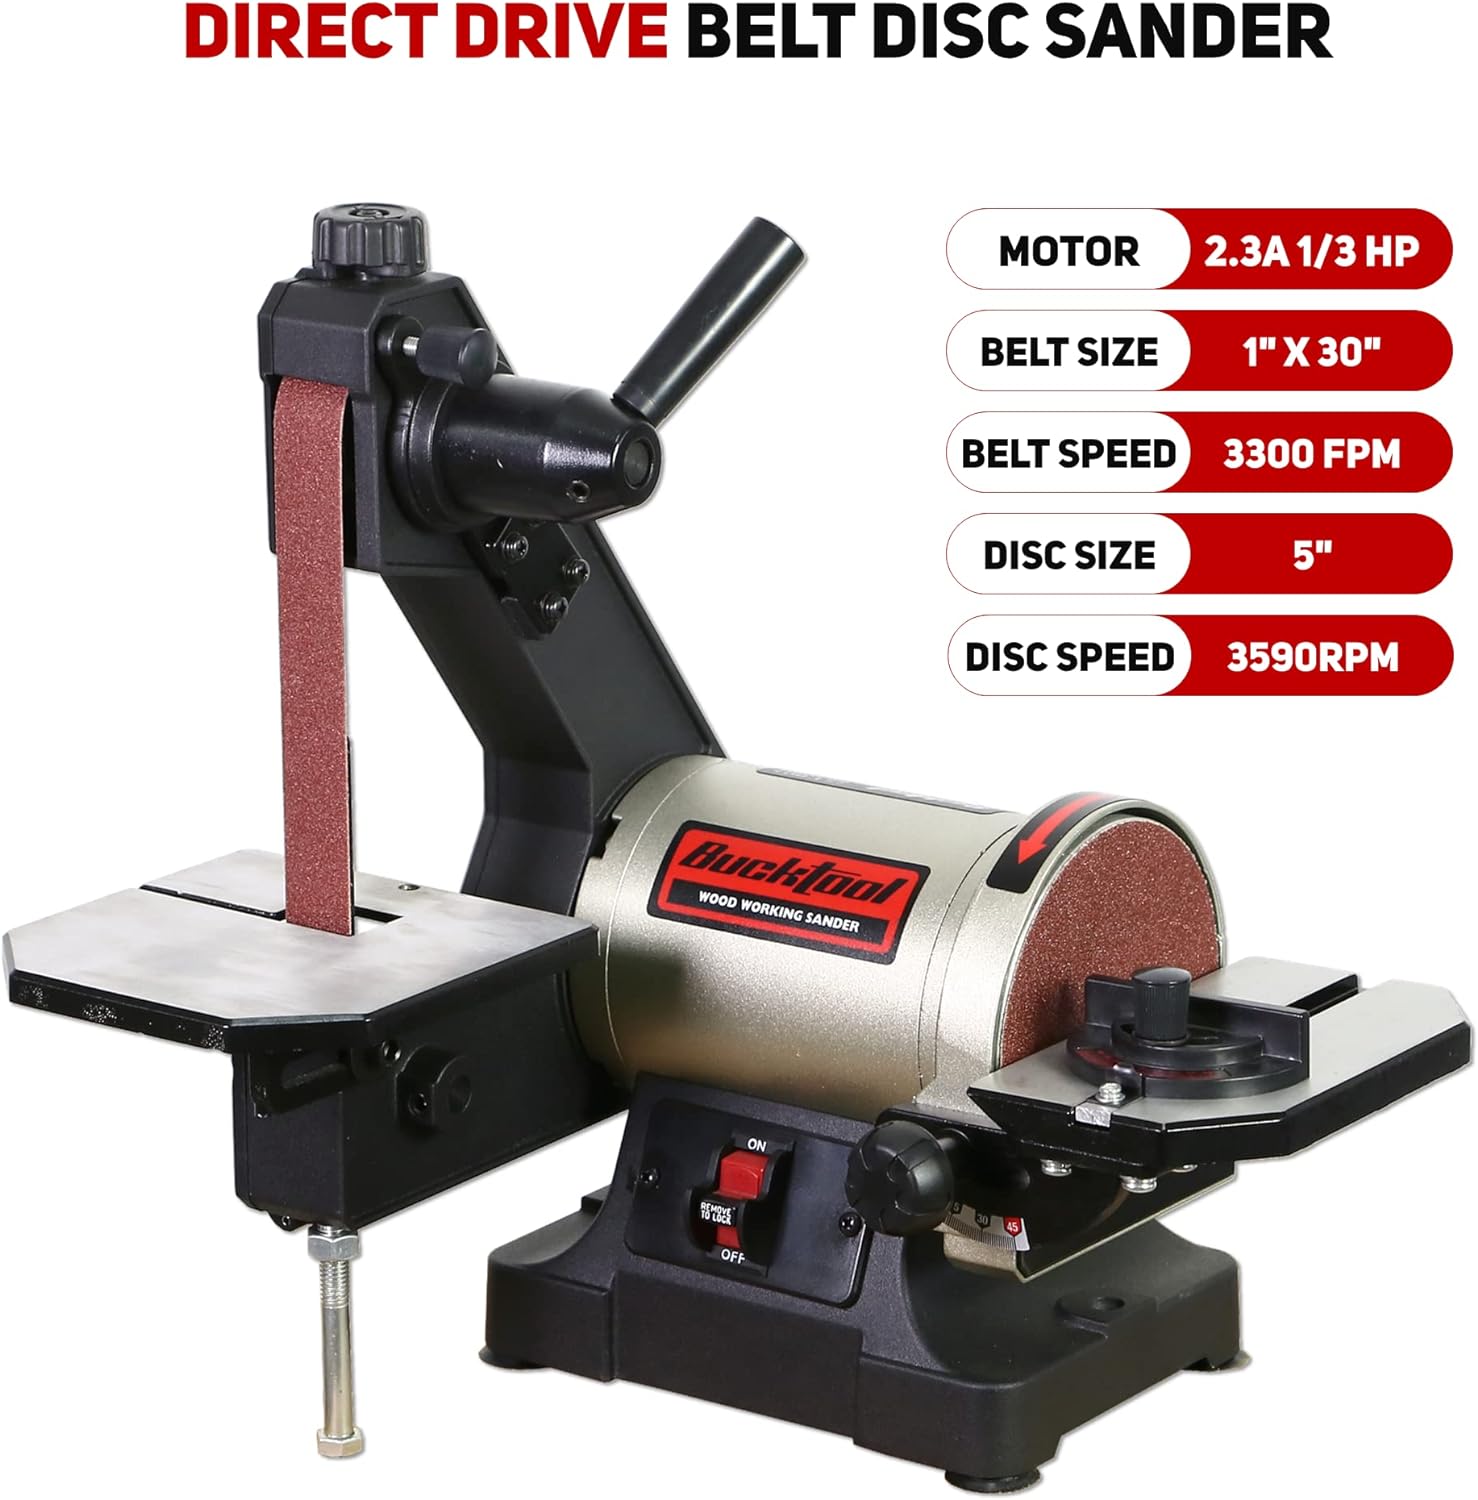 Bucktool 1x30 Inch Bench Belt Sander with 5 Inch Disc with Wrench Storage and Easy Belt Cover Off, 1/3HP Direct Drive Benchtop Belt Disc Sander